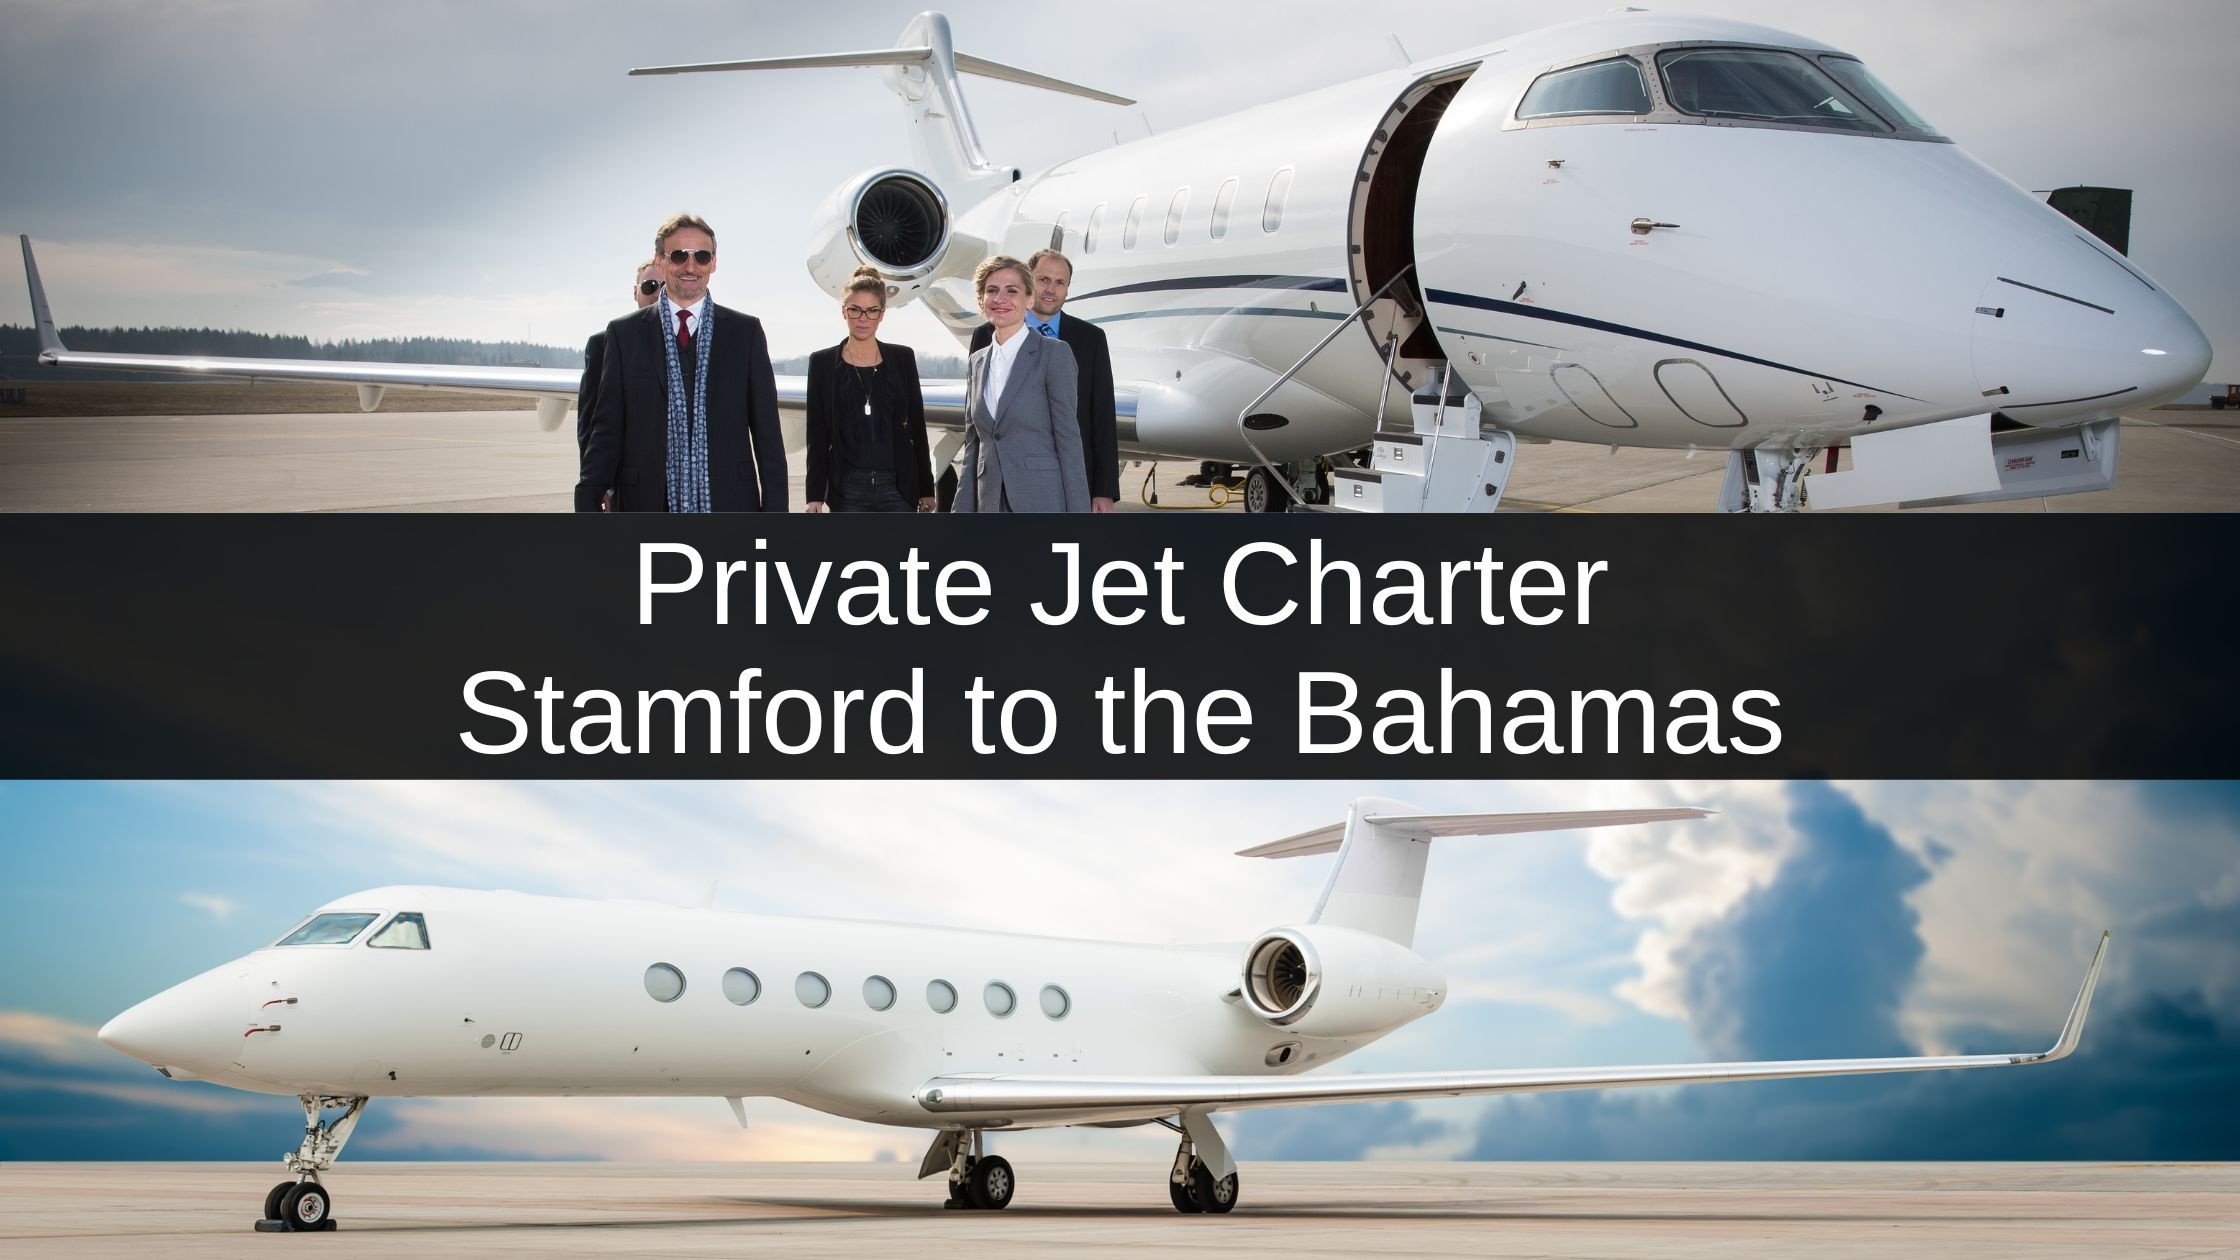 Private Jet Charter from Stamford to the Bahamas